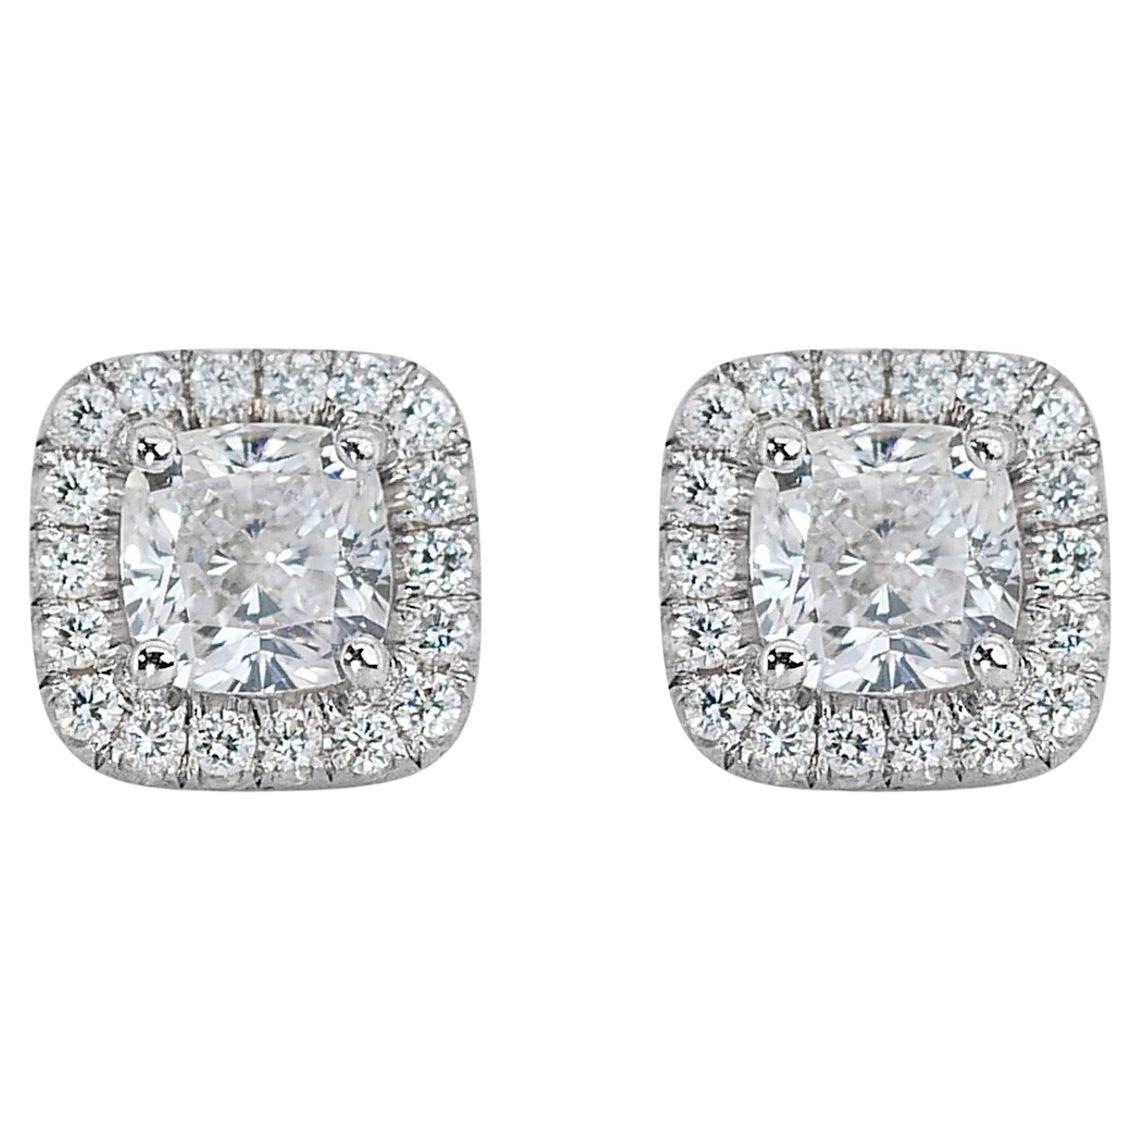 Stunning 2.33ct Diamond Halo Stud Earrings in 18k White Gold - GIA Certified For Sale